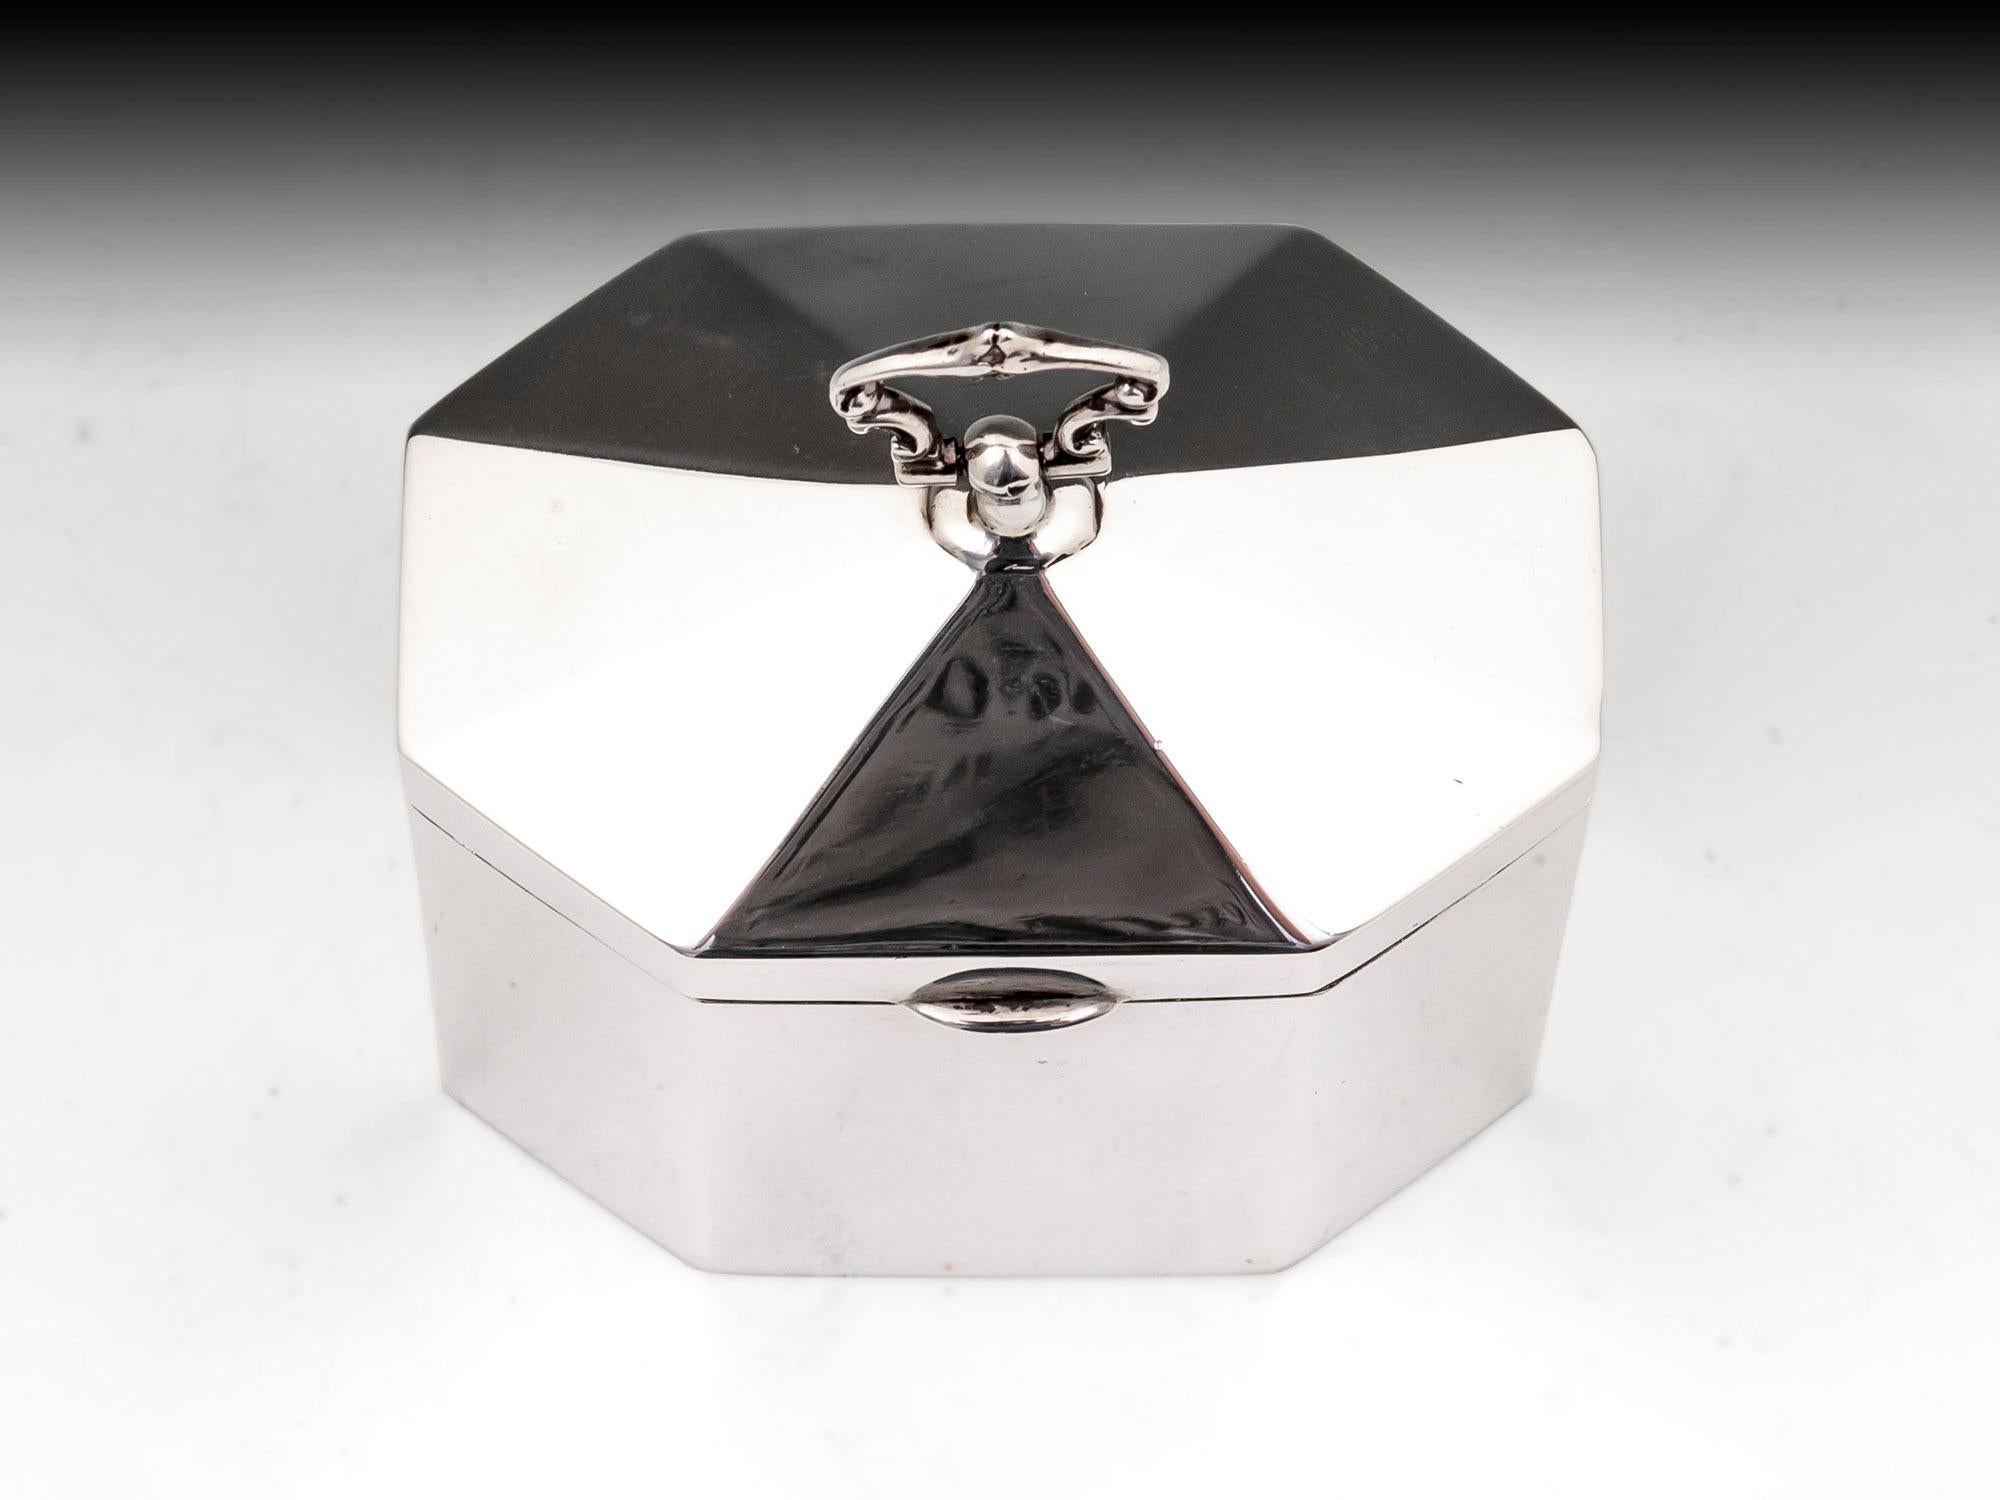 Antique sterling silver octagonal tented top tea caddy by Birmingham silversmith Mappin & Webb.